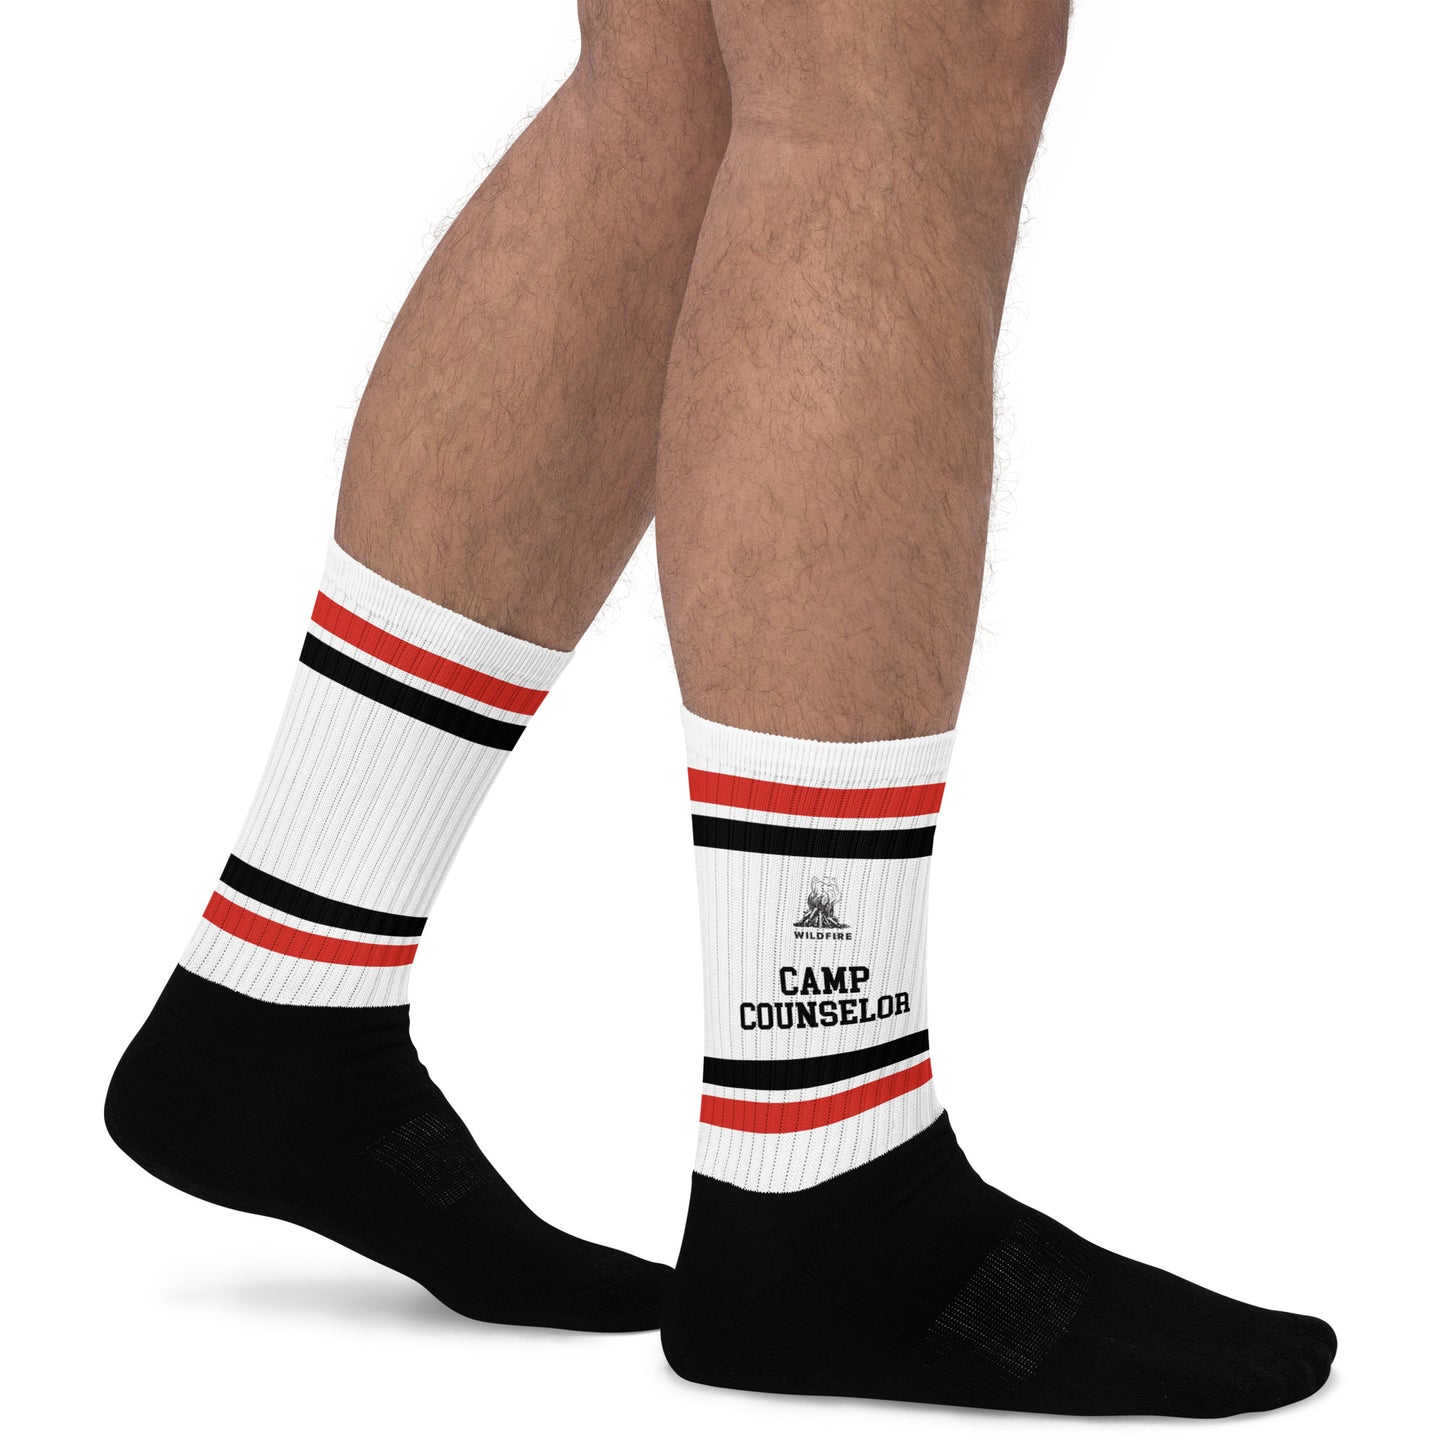 Wildfire Cigars Camp Counselor Socks in red white and black